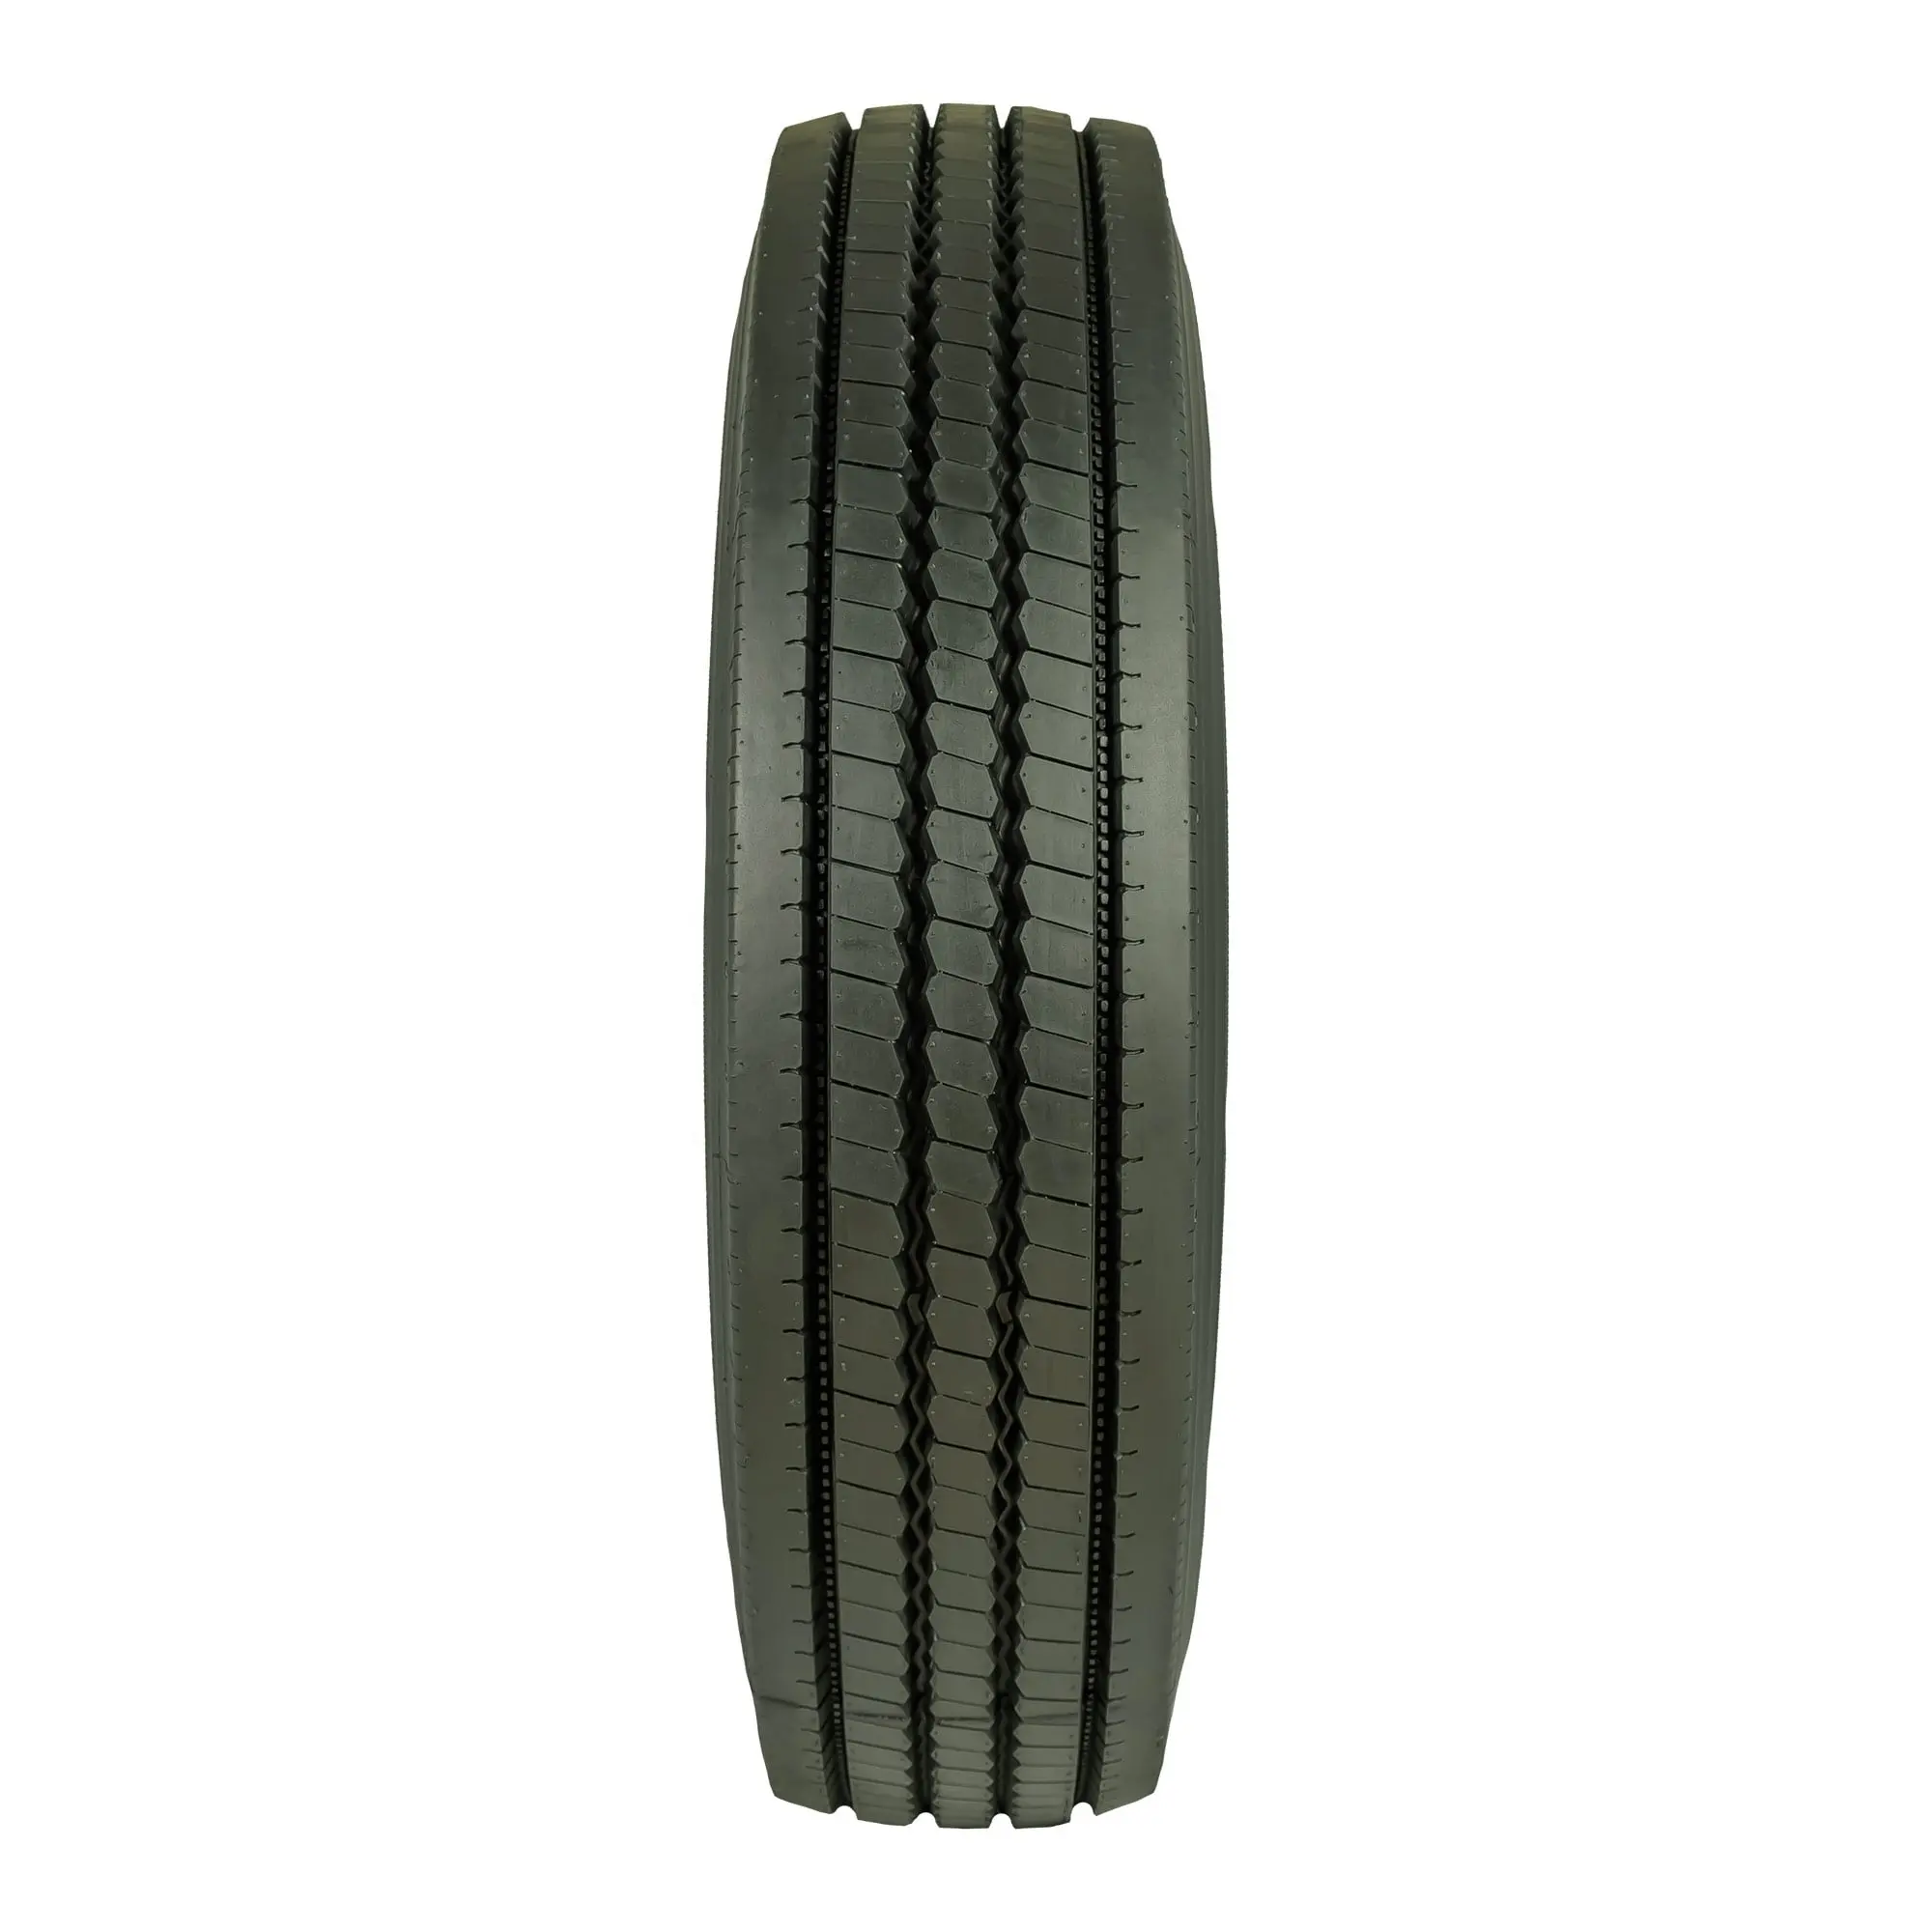 Longmarch tyres 1000R20 10.00R20 truck tire with tube flap 10.00 r20 1000 r20 1000/20 bus tyres